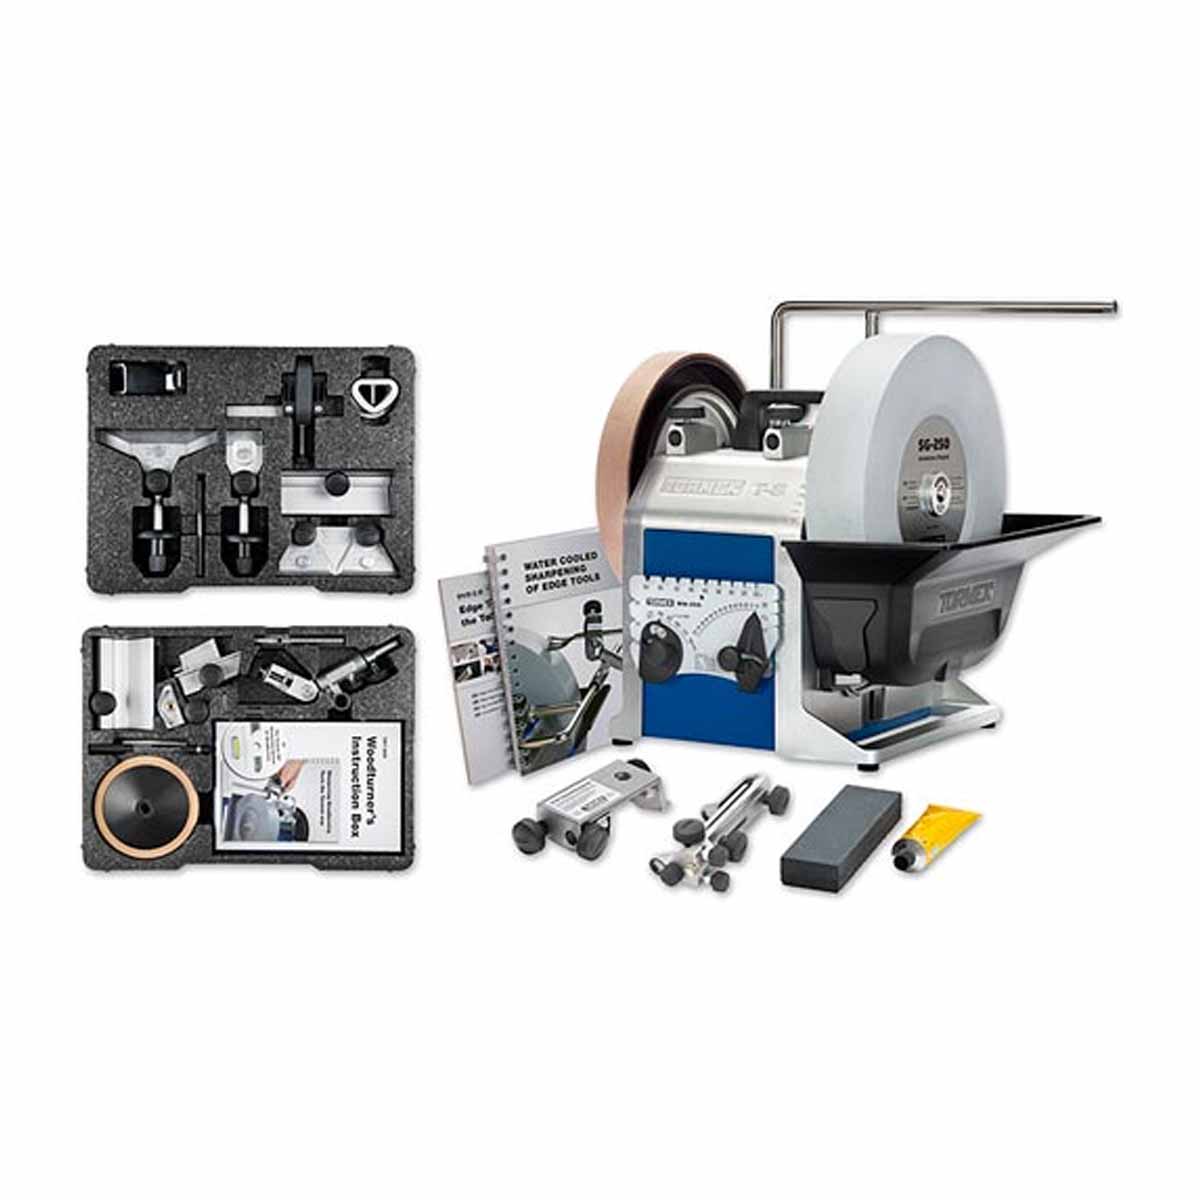 Tormek - T-8 Water Cooled Sharpening System